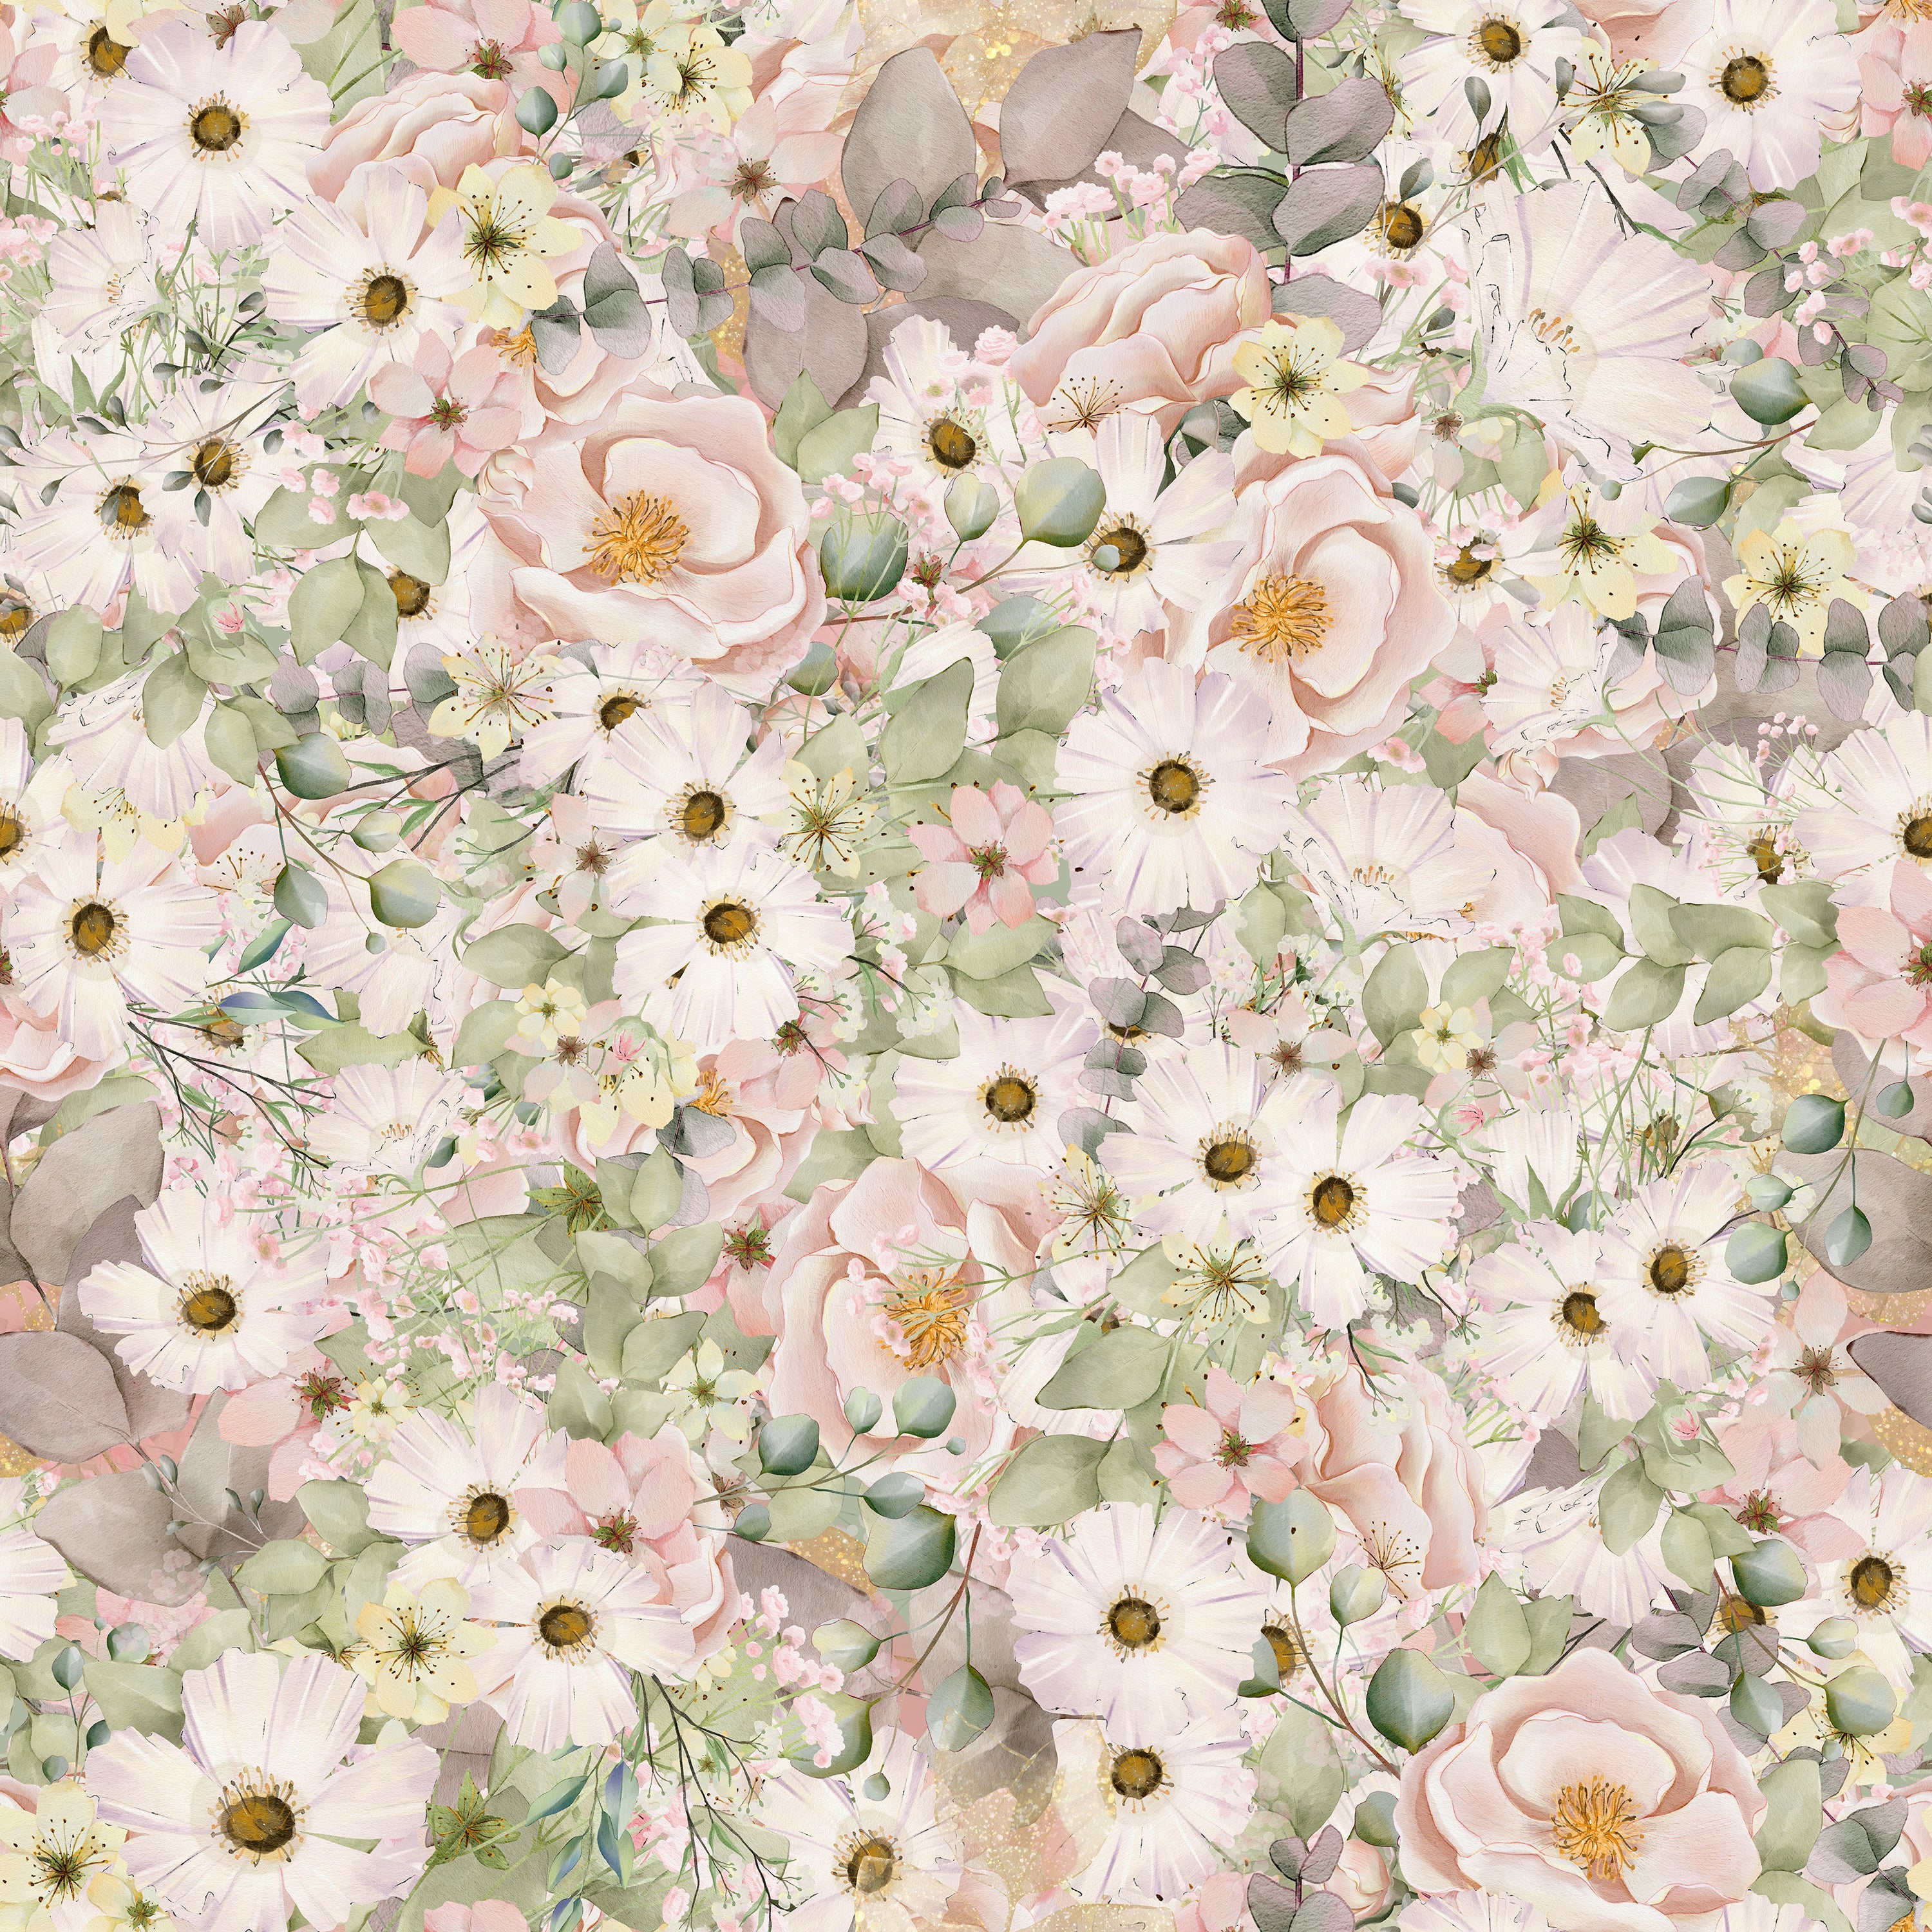 Dense floral wallpaper pattern featuring an array of soft pink roses, daisies, and other wildflowers intertwined with green foliage, creating a lush, romantic garden effect on a muted background